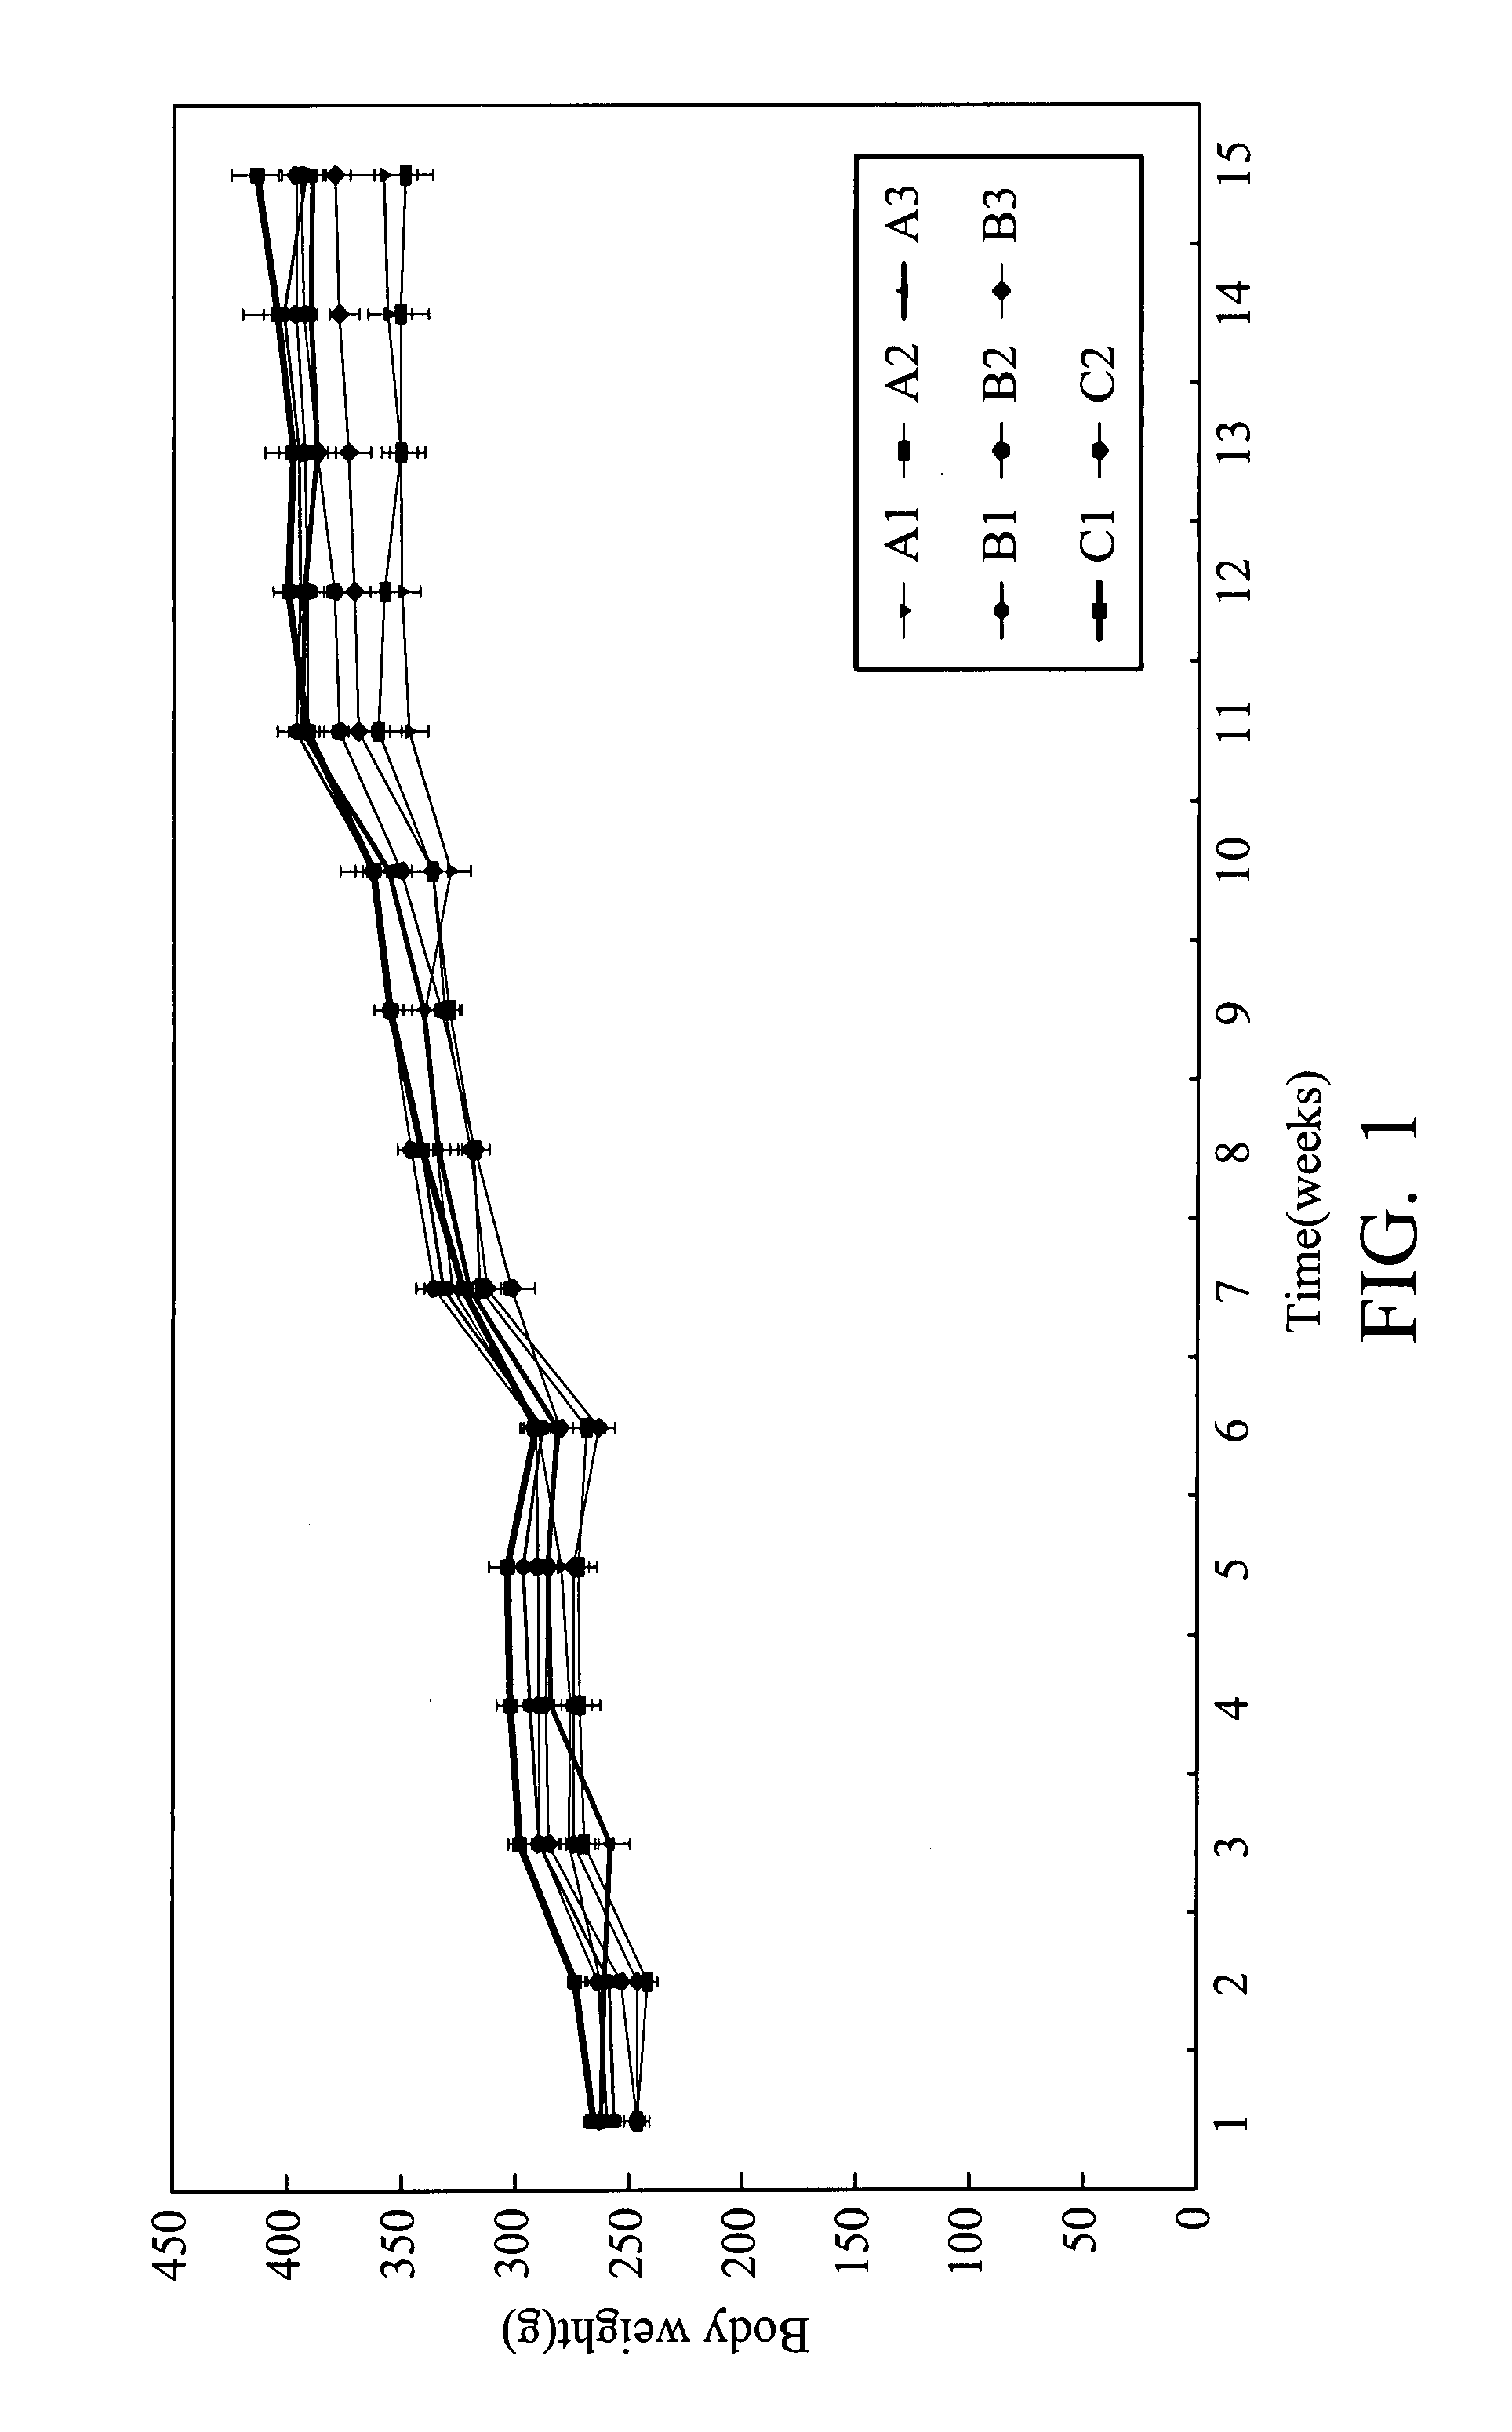 Composition for prevention and/or treatment of cancer